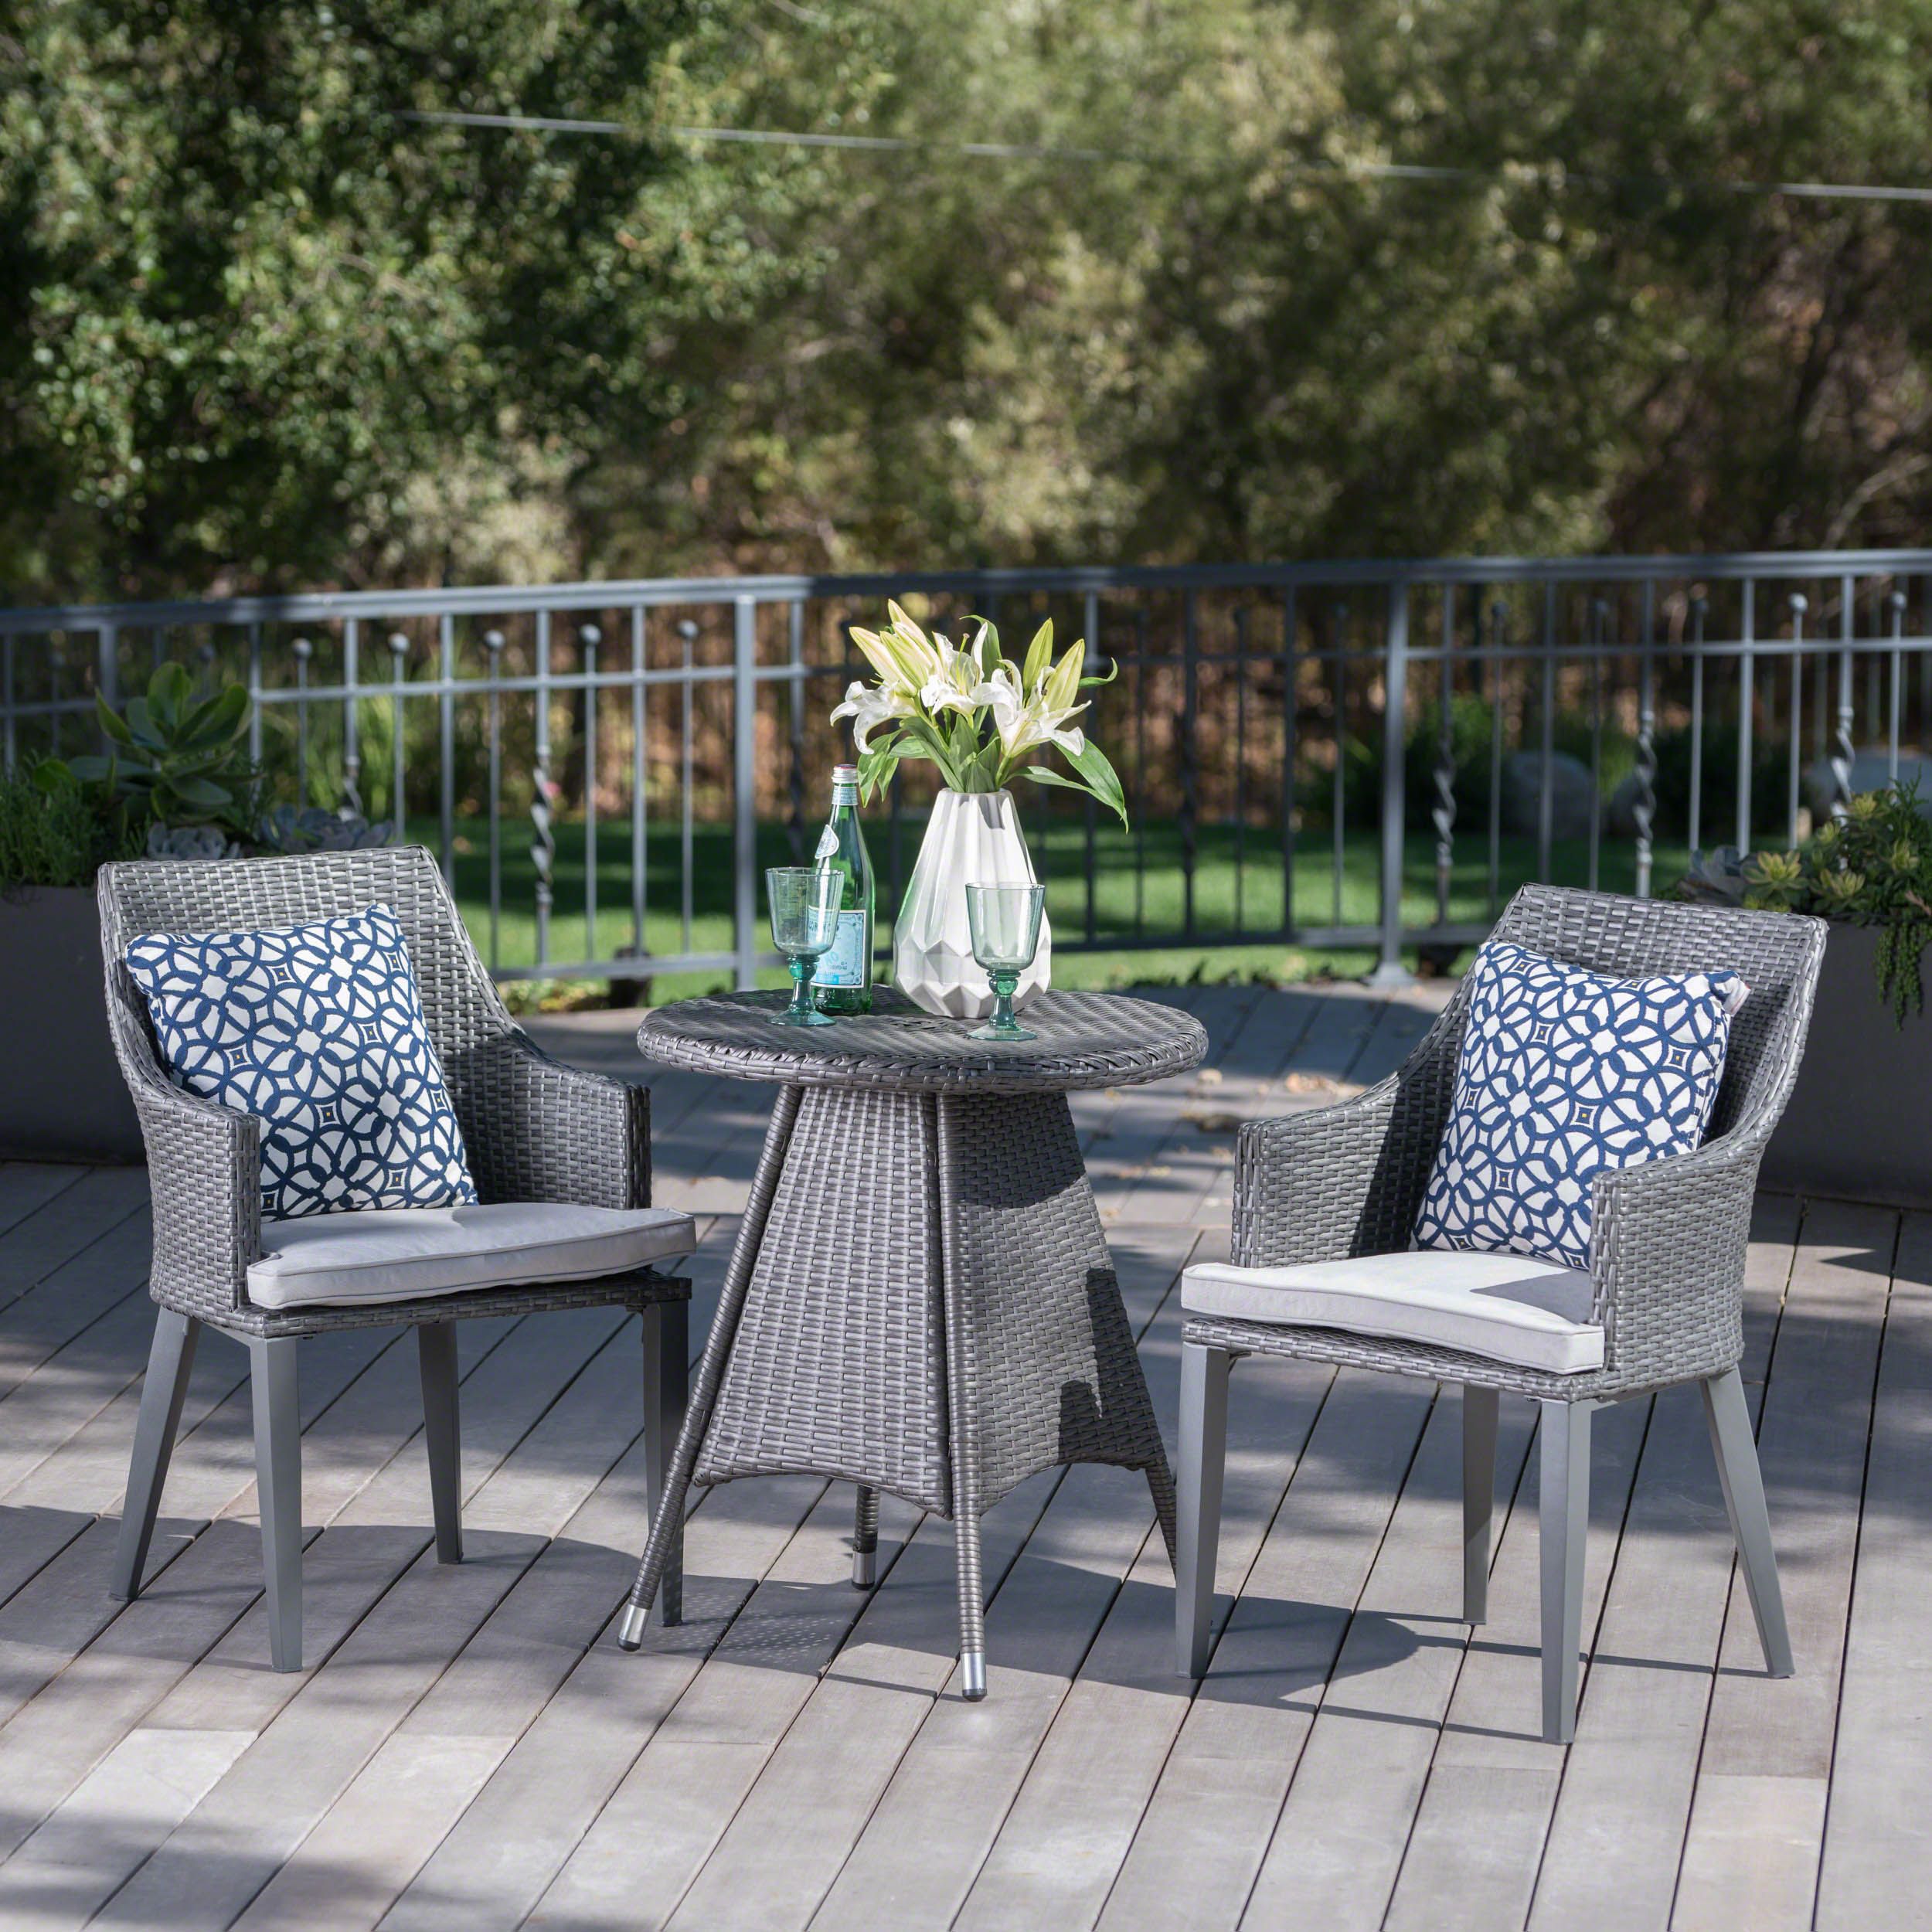 Hillsdale Outdoor 3 Piece Wicker Round Bistro Set With Cushions, Grey Inside Outdoor Wicker Cafe Dining Sets (View 1 of 15)